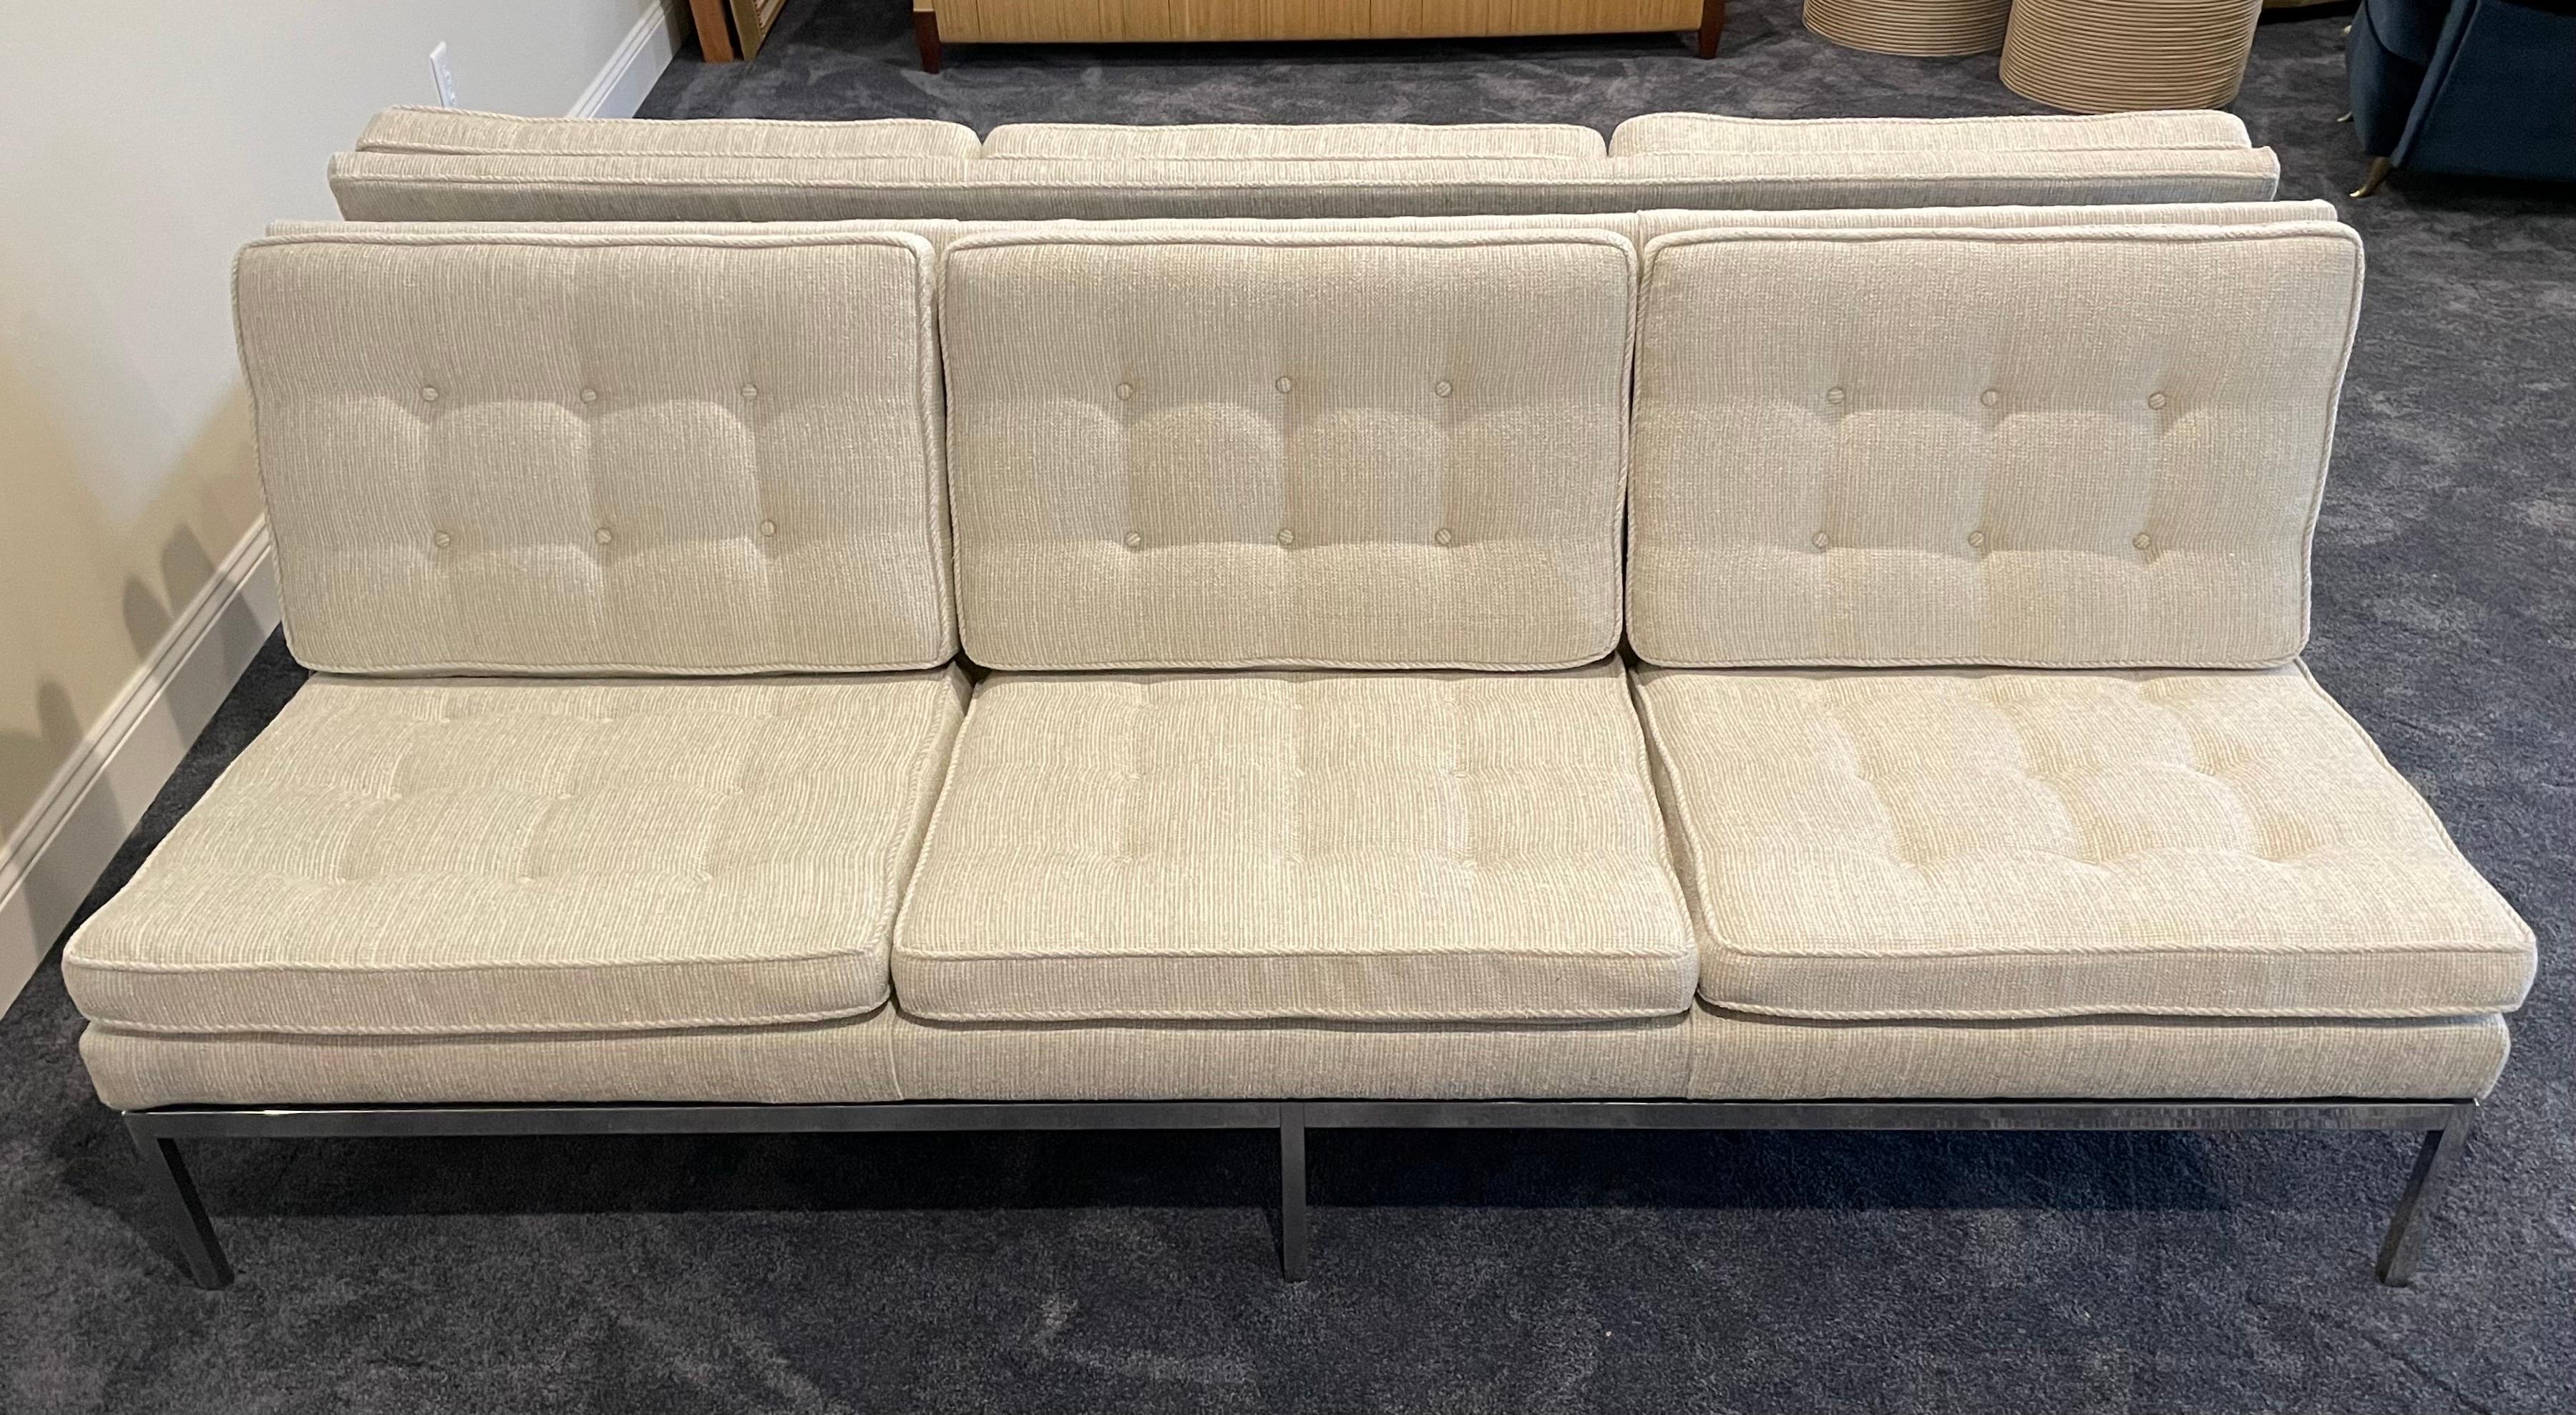 1960s Mid-Century Modern Florence Knoll Slipper Sofas- a Pair In Good Condition For Sale In Roanoke, VA